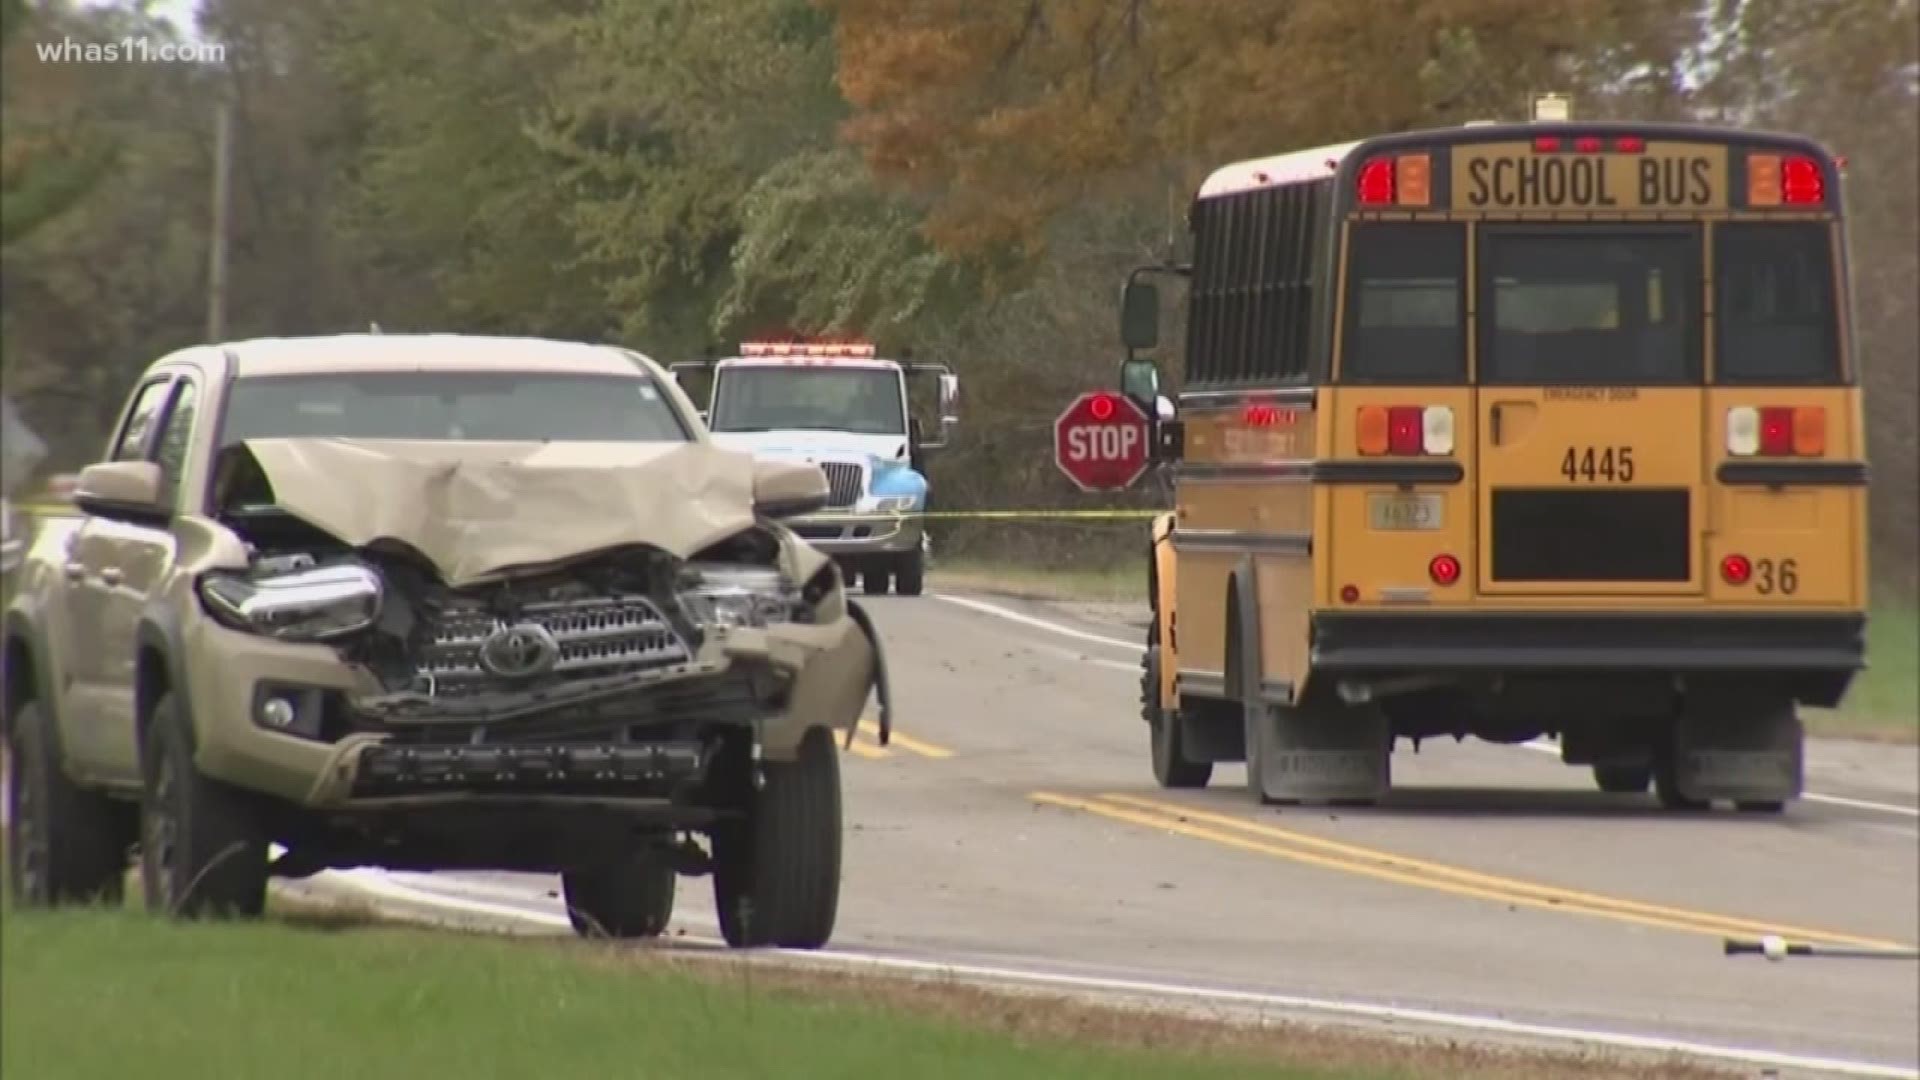 Penalties for drivers who violate school bus stop arms are getting stricter.